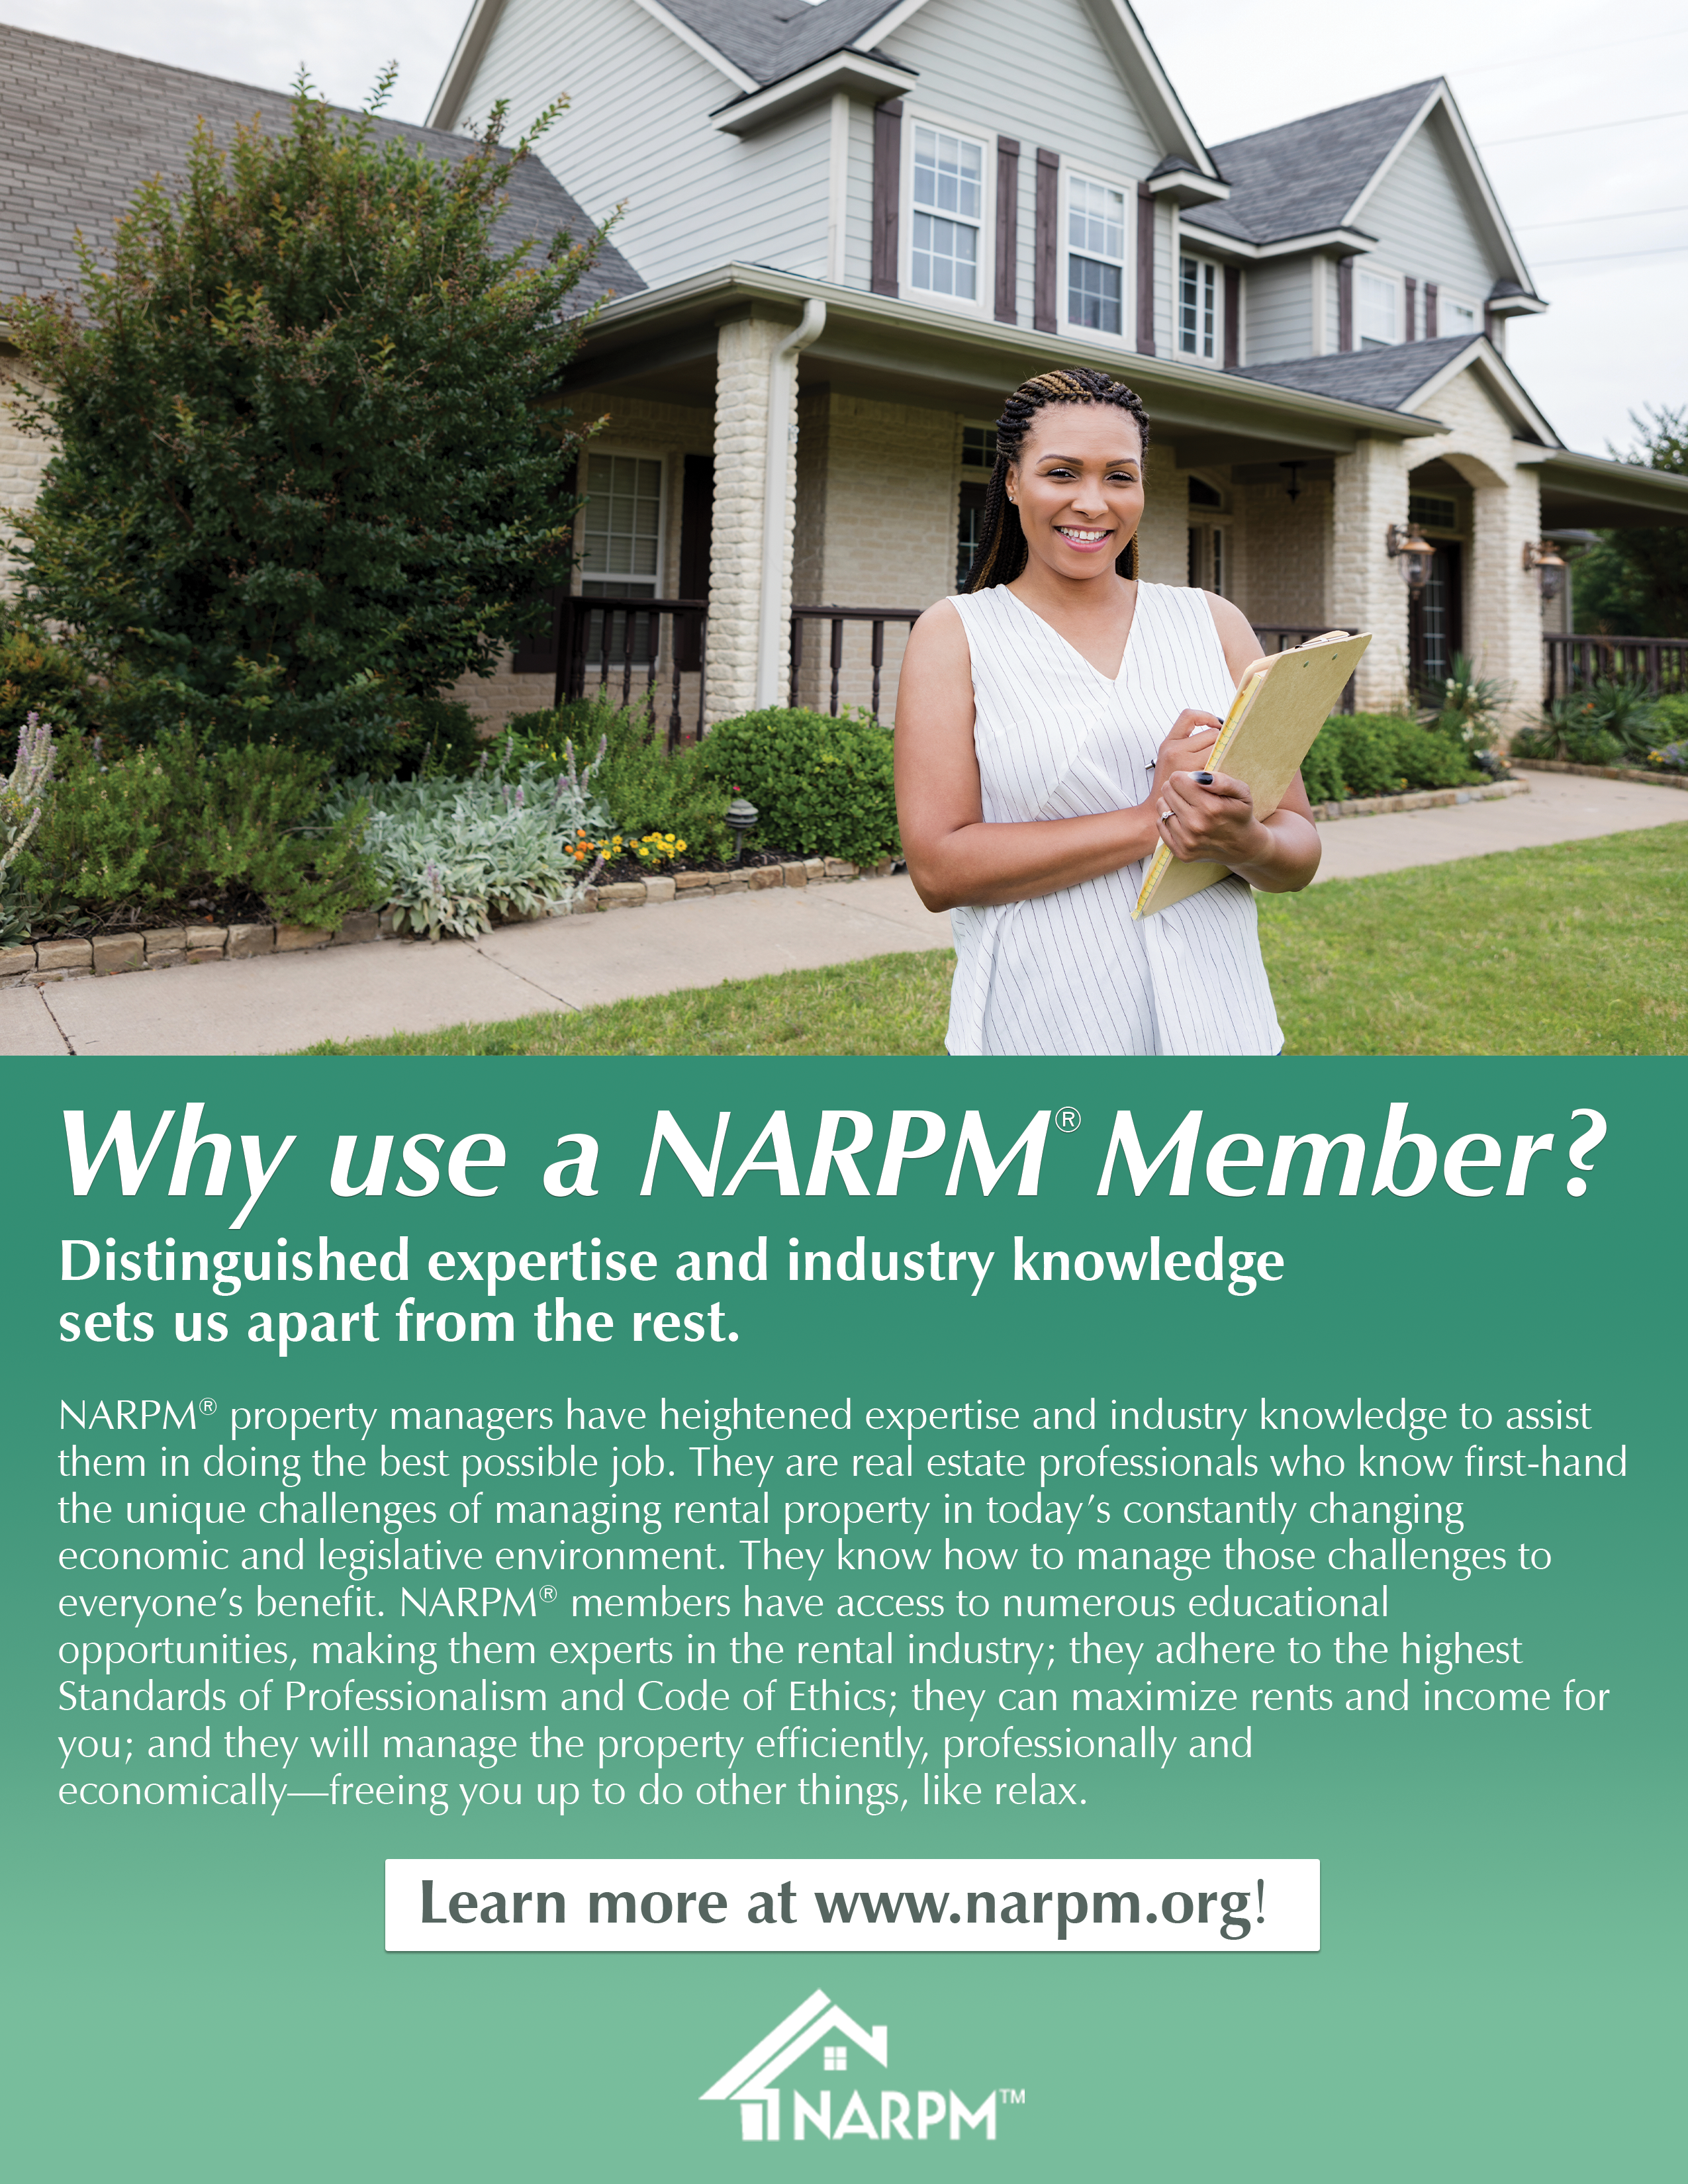 Why use a NARPM member